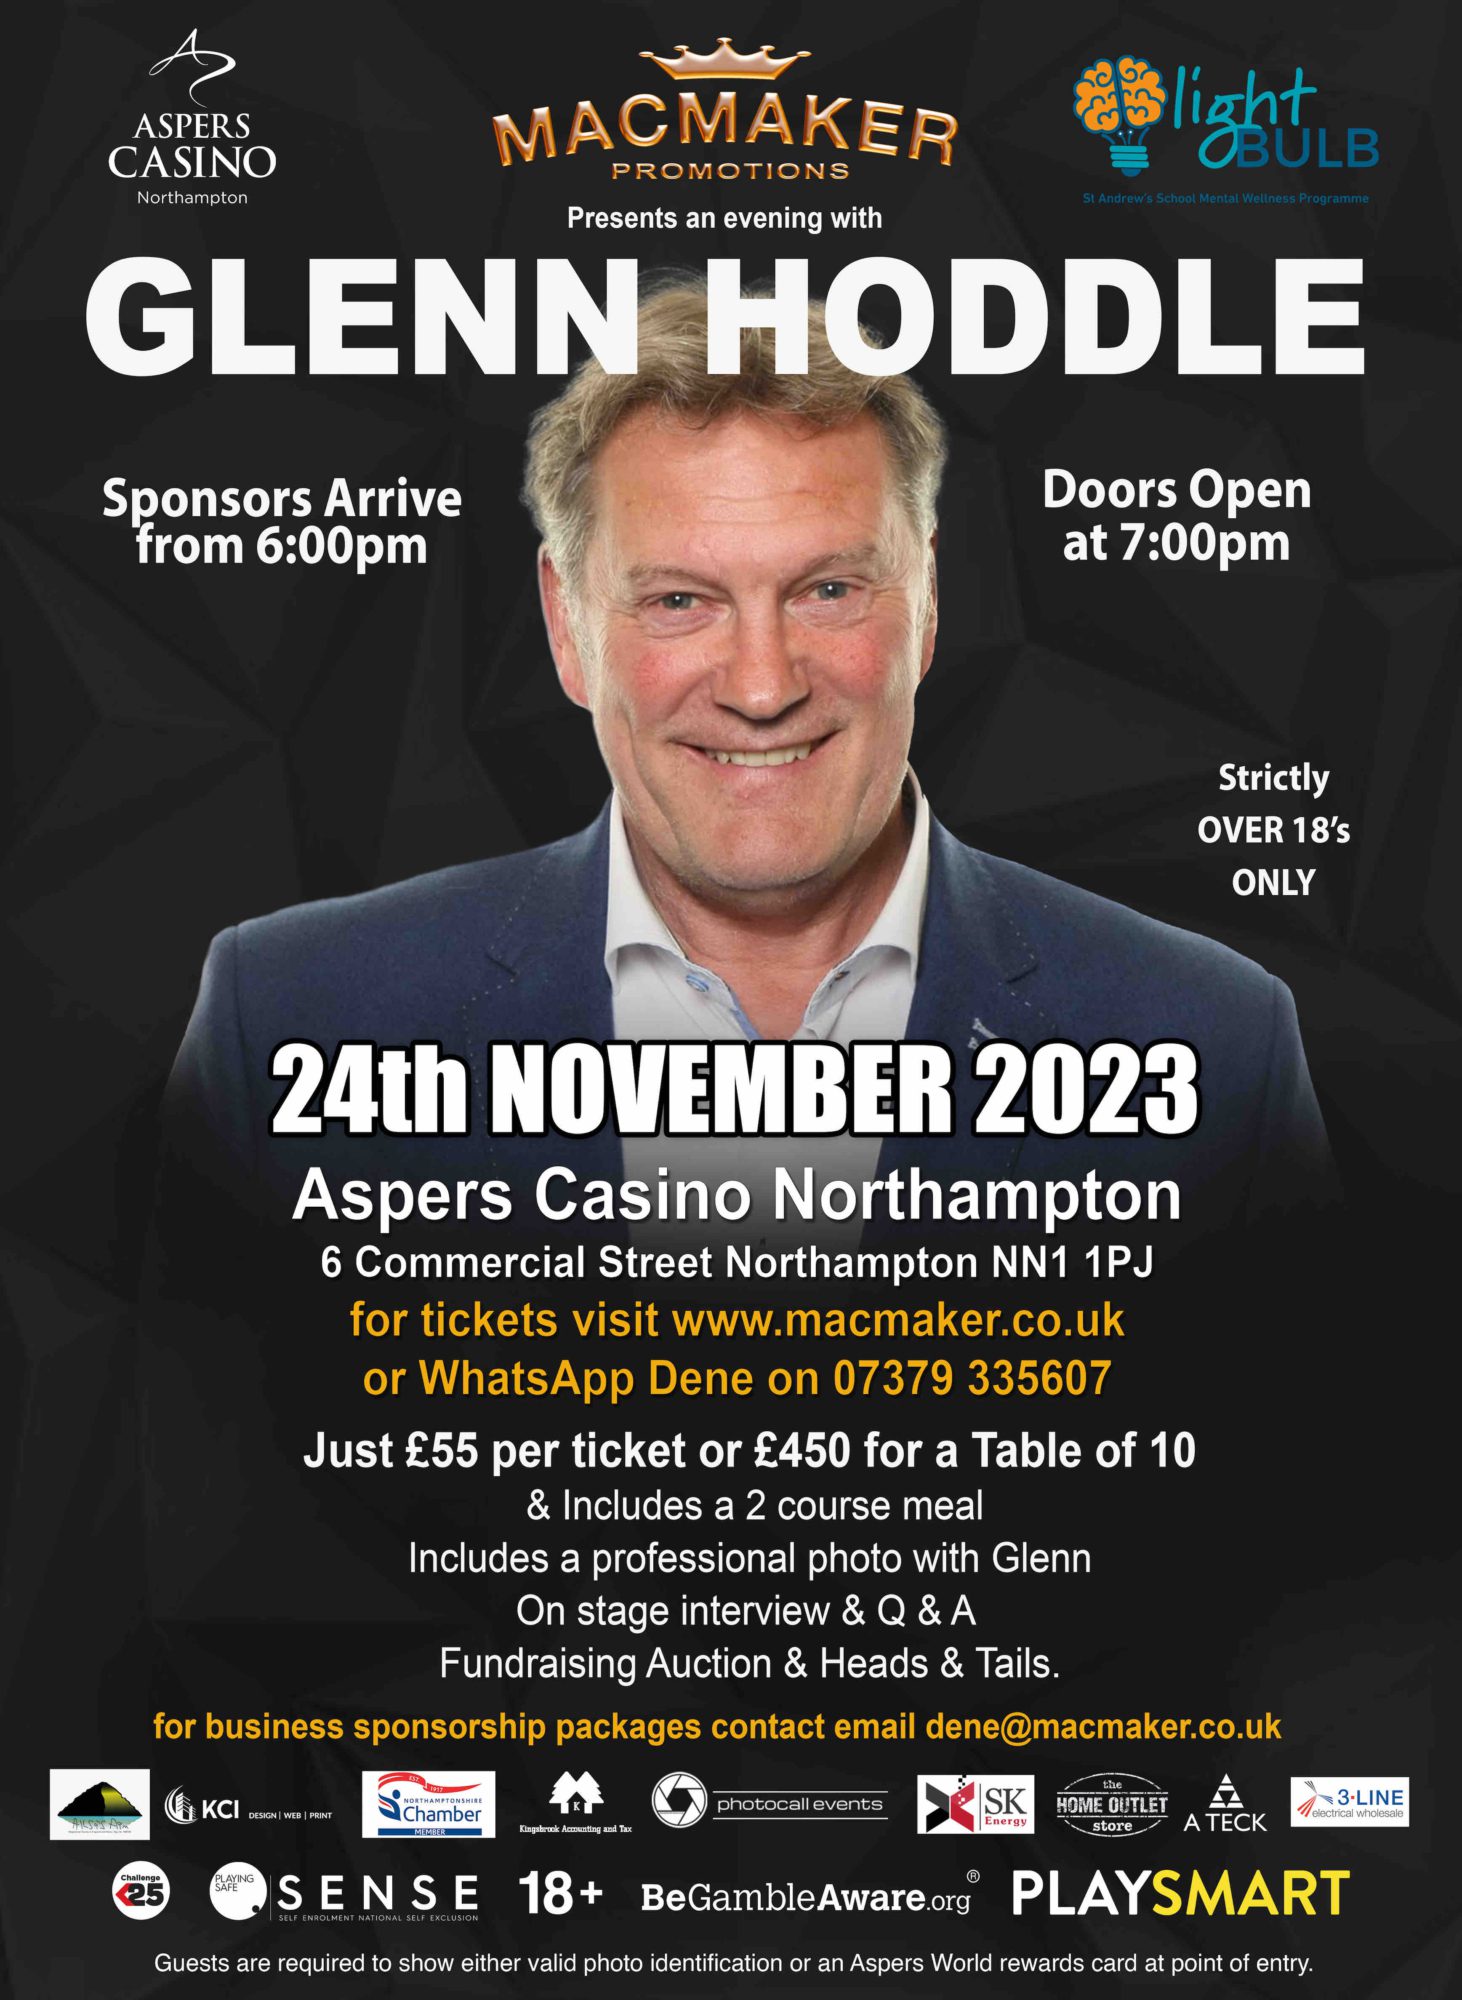 An Evening With Glenn Hoddle Sponsorship Package Offer. | Northamptonshire Chamber of Commerce